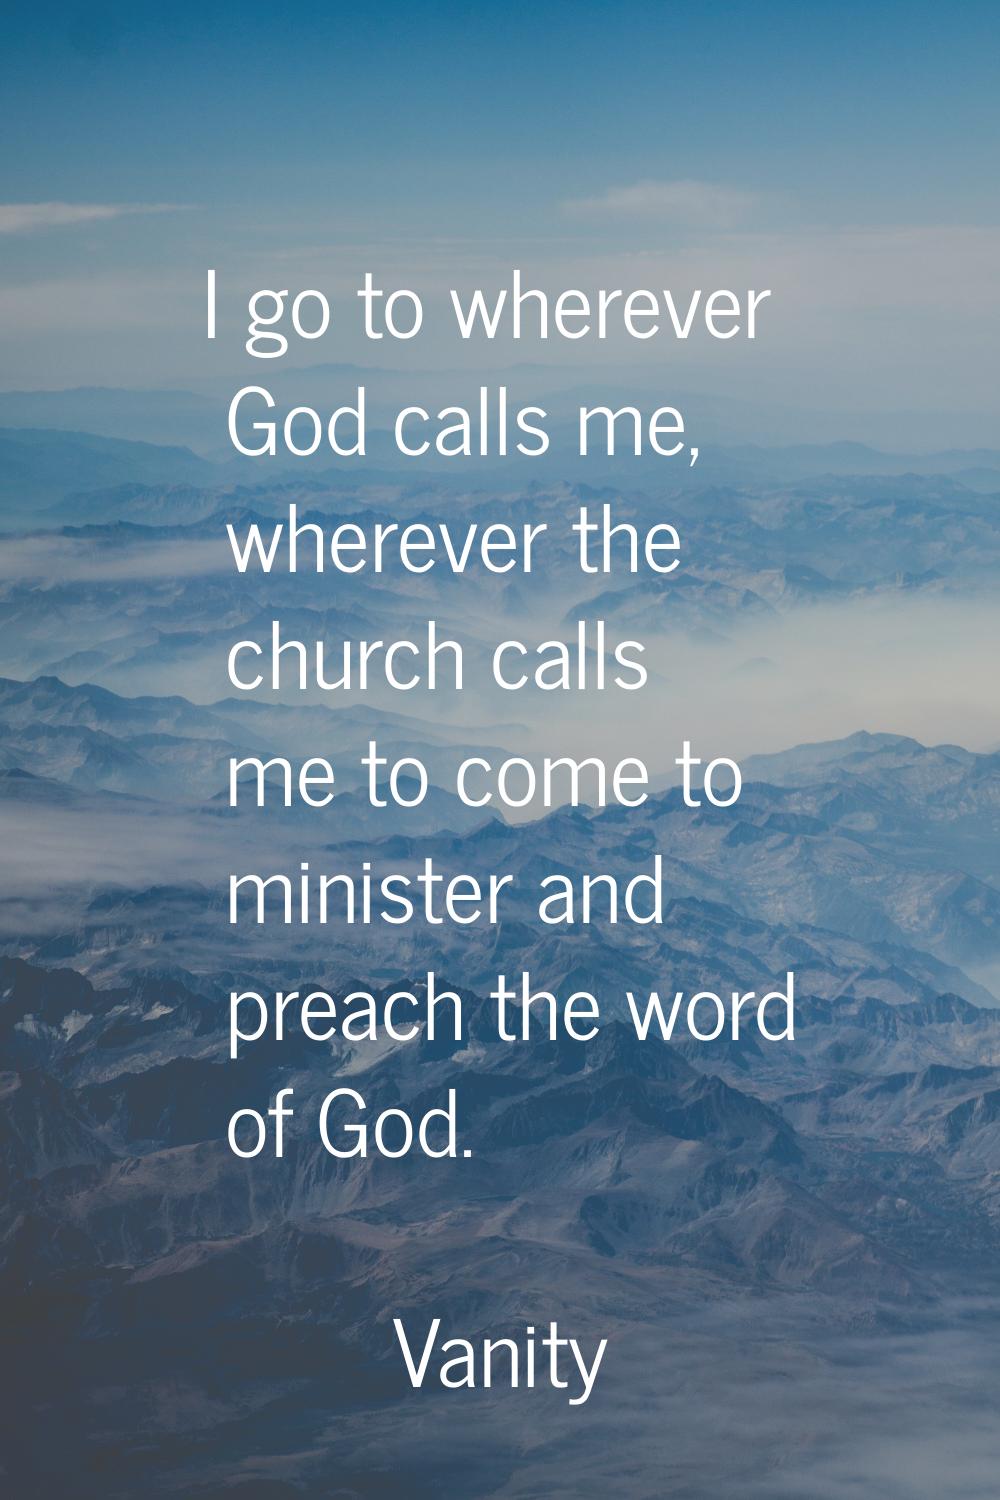 I go to wherever God calls me, wherever the church calls me to come to minister and preach the word